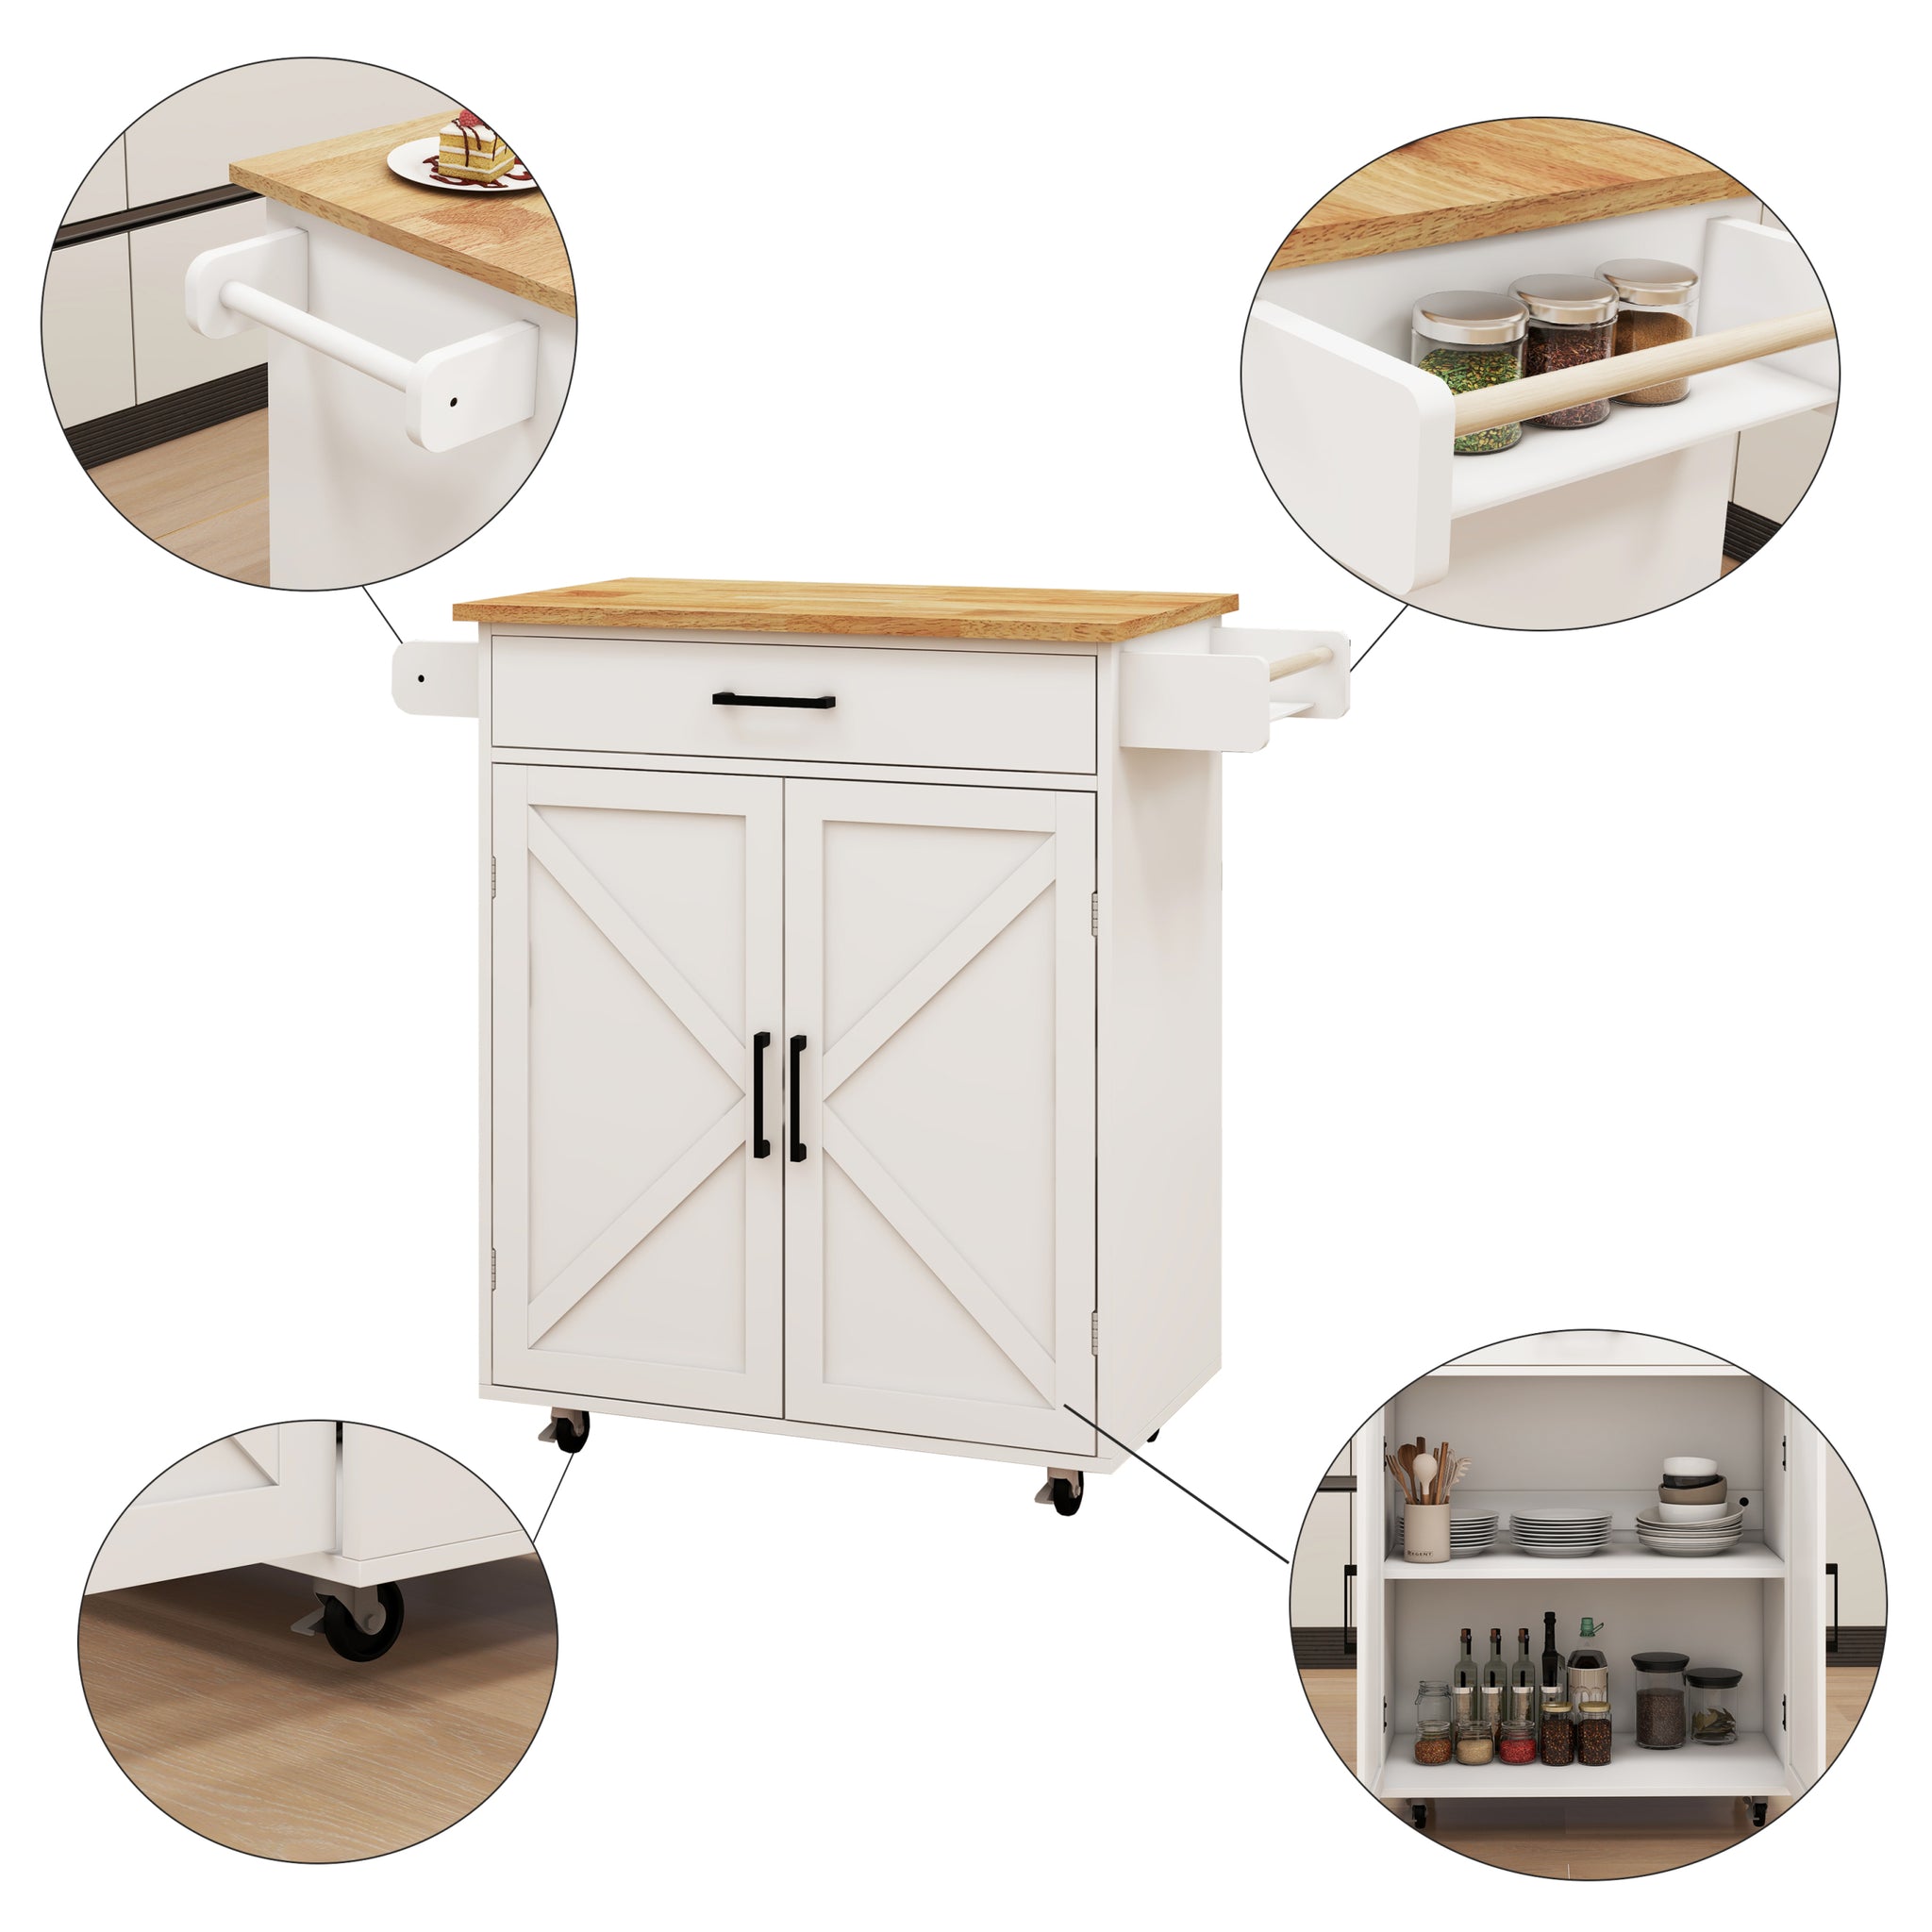 Kitchen island rolling trolley cart with